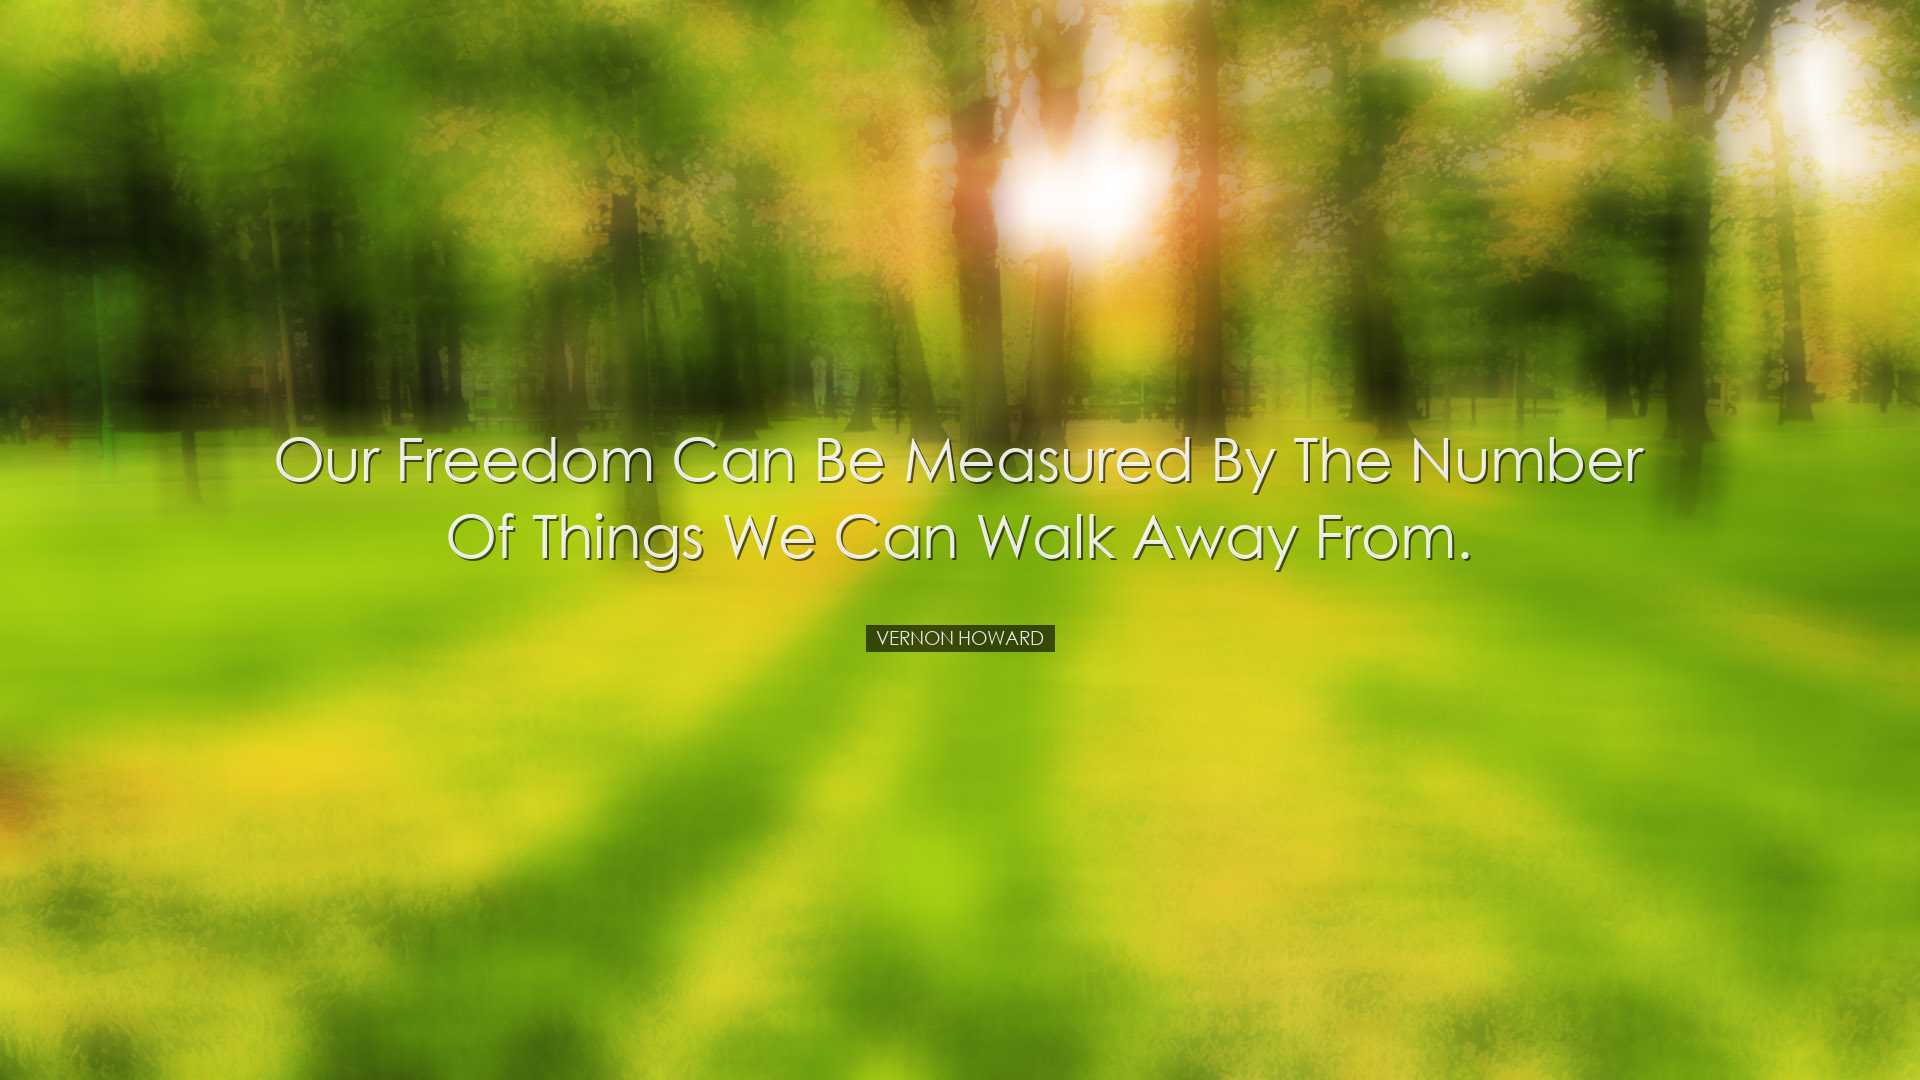 Our freedom can be measured by the number of things we can walk aw